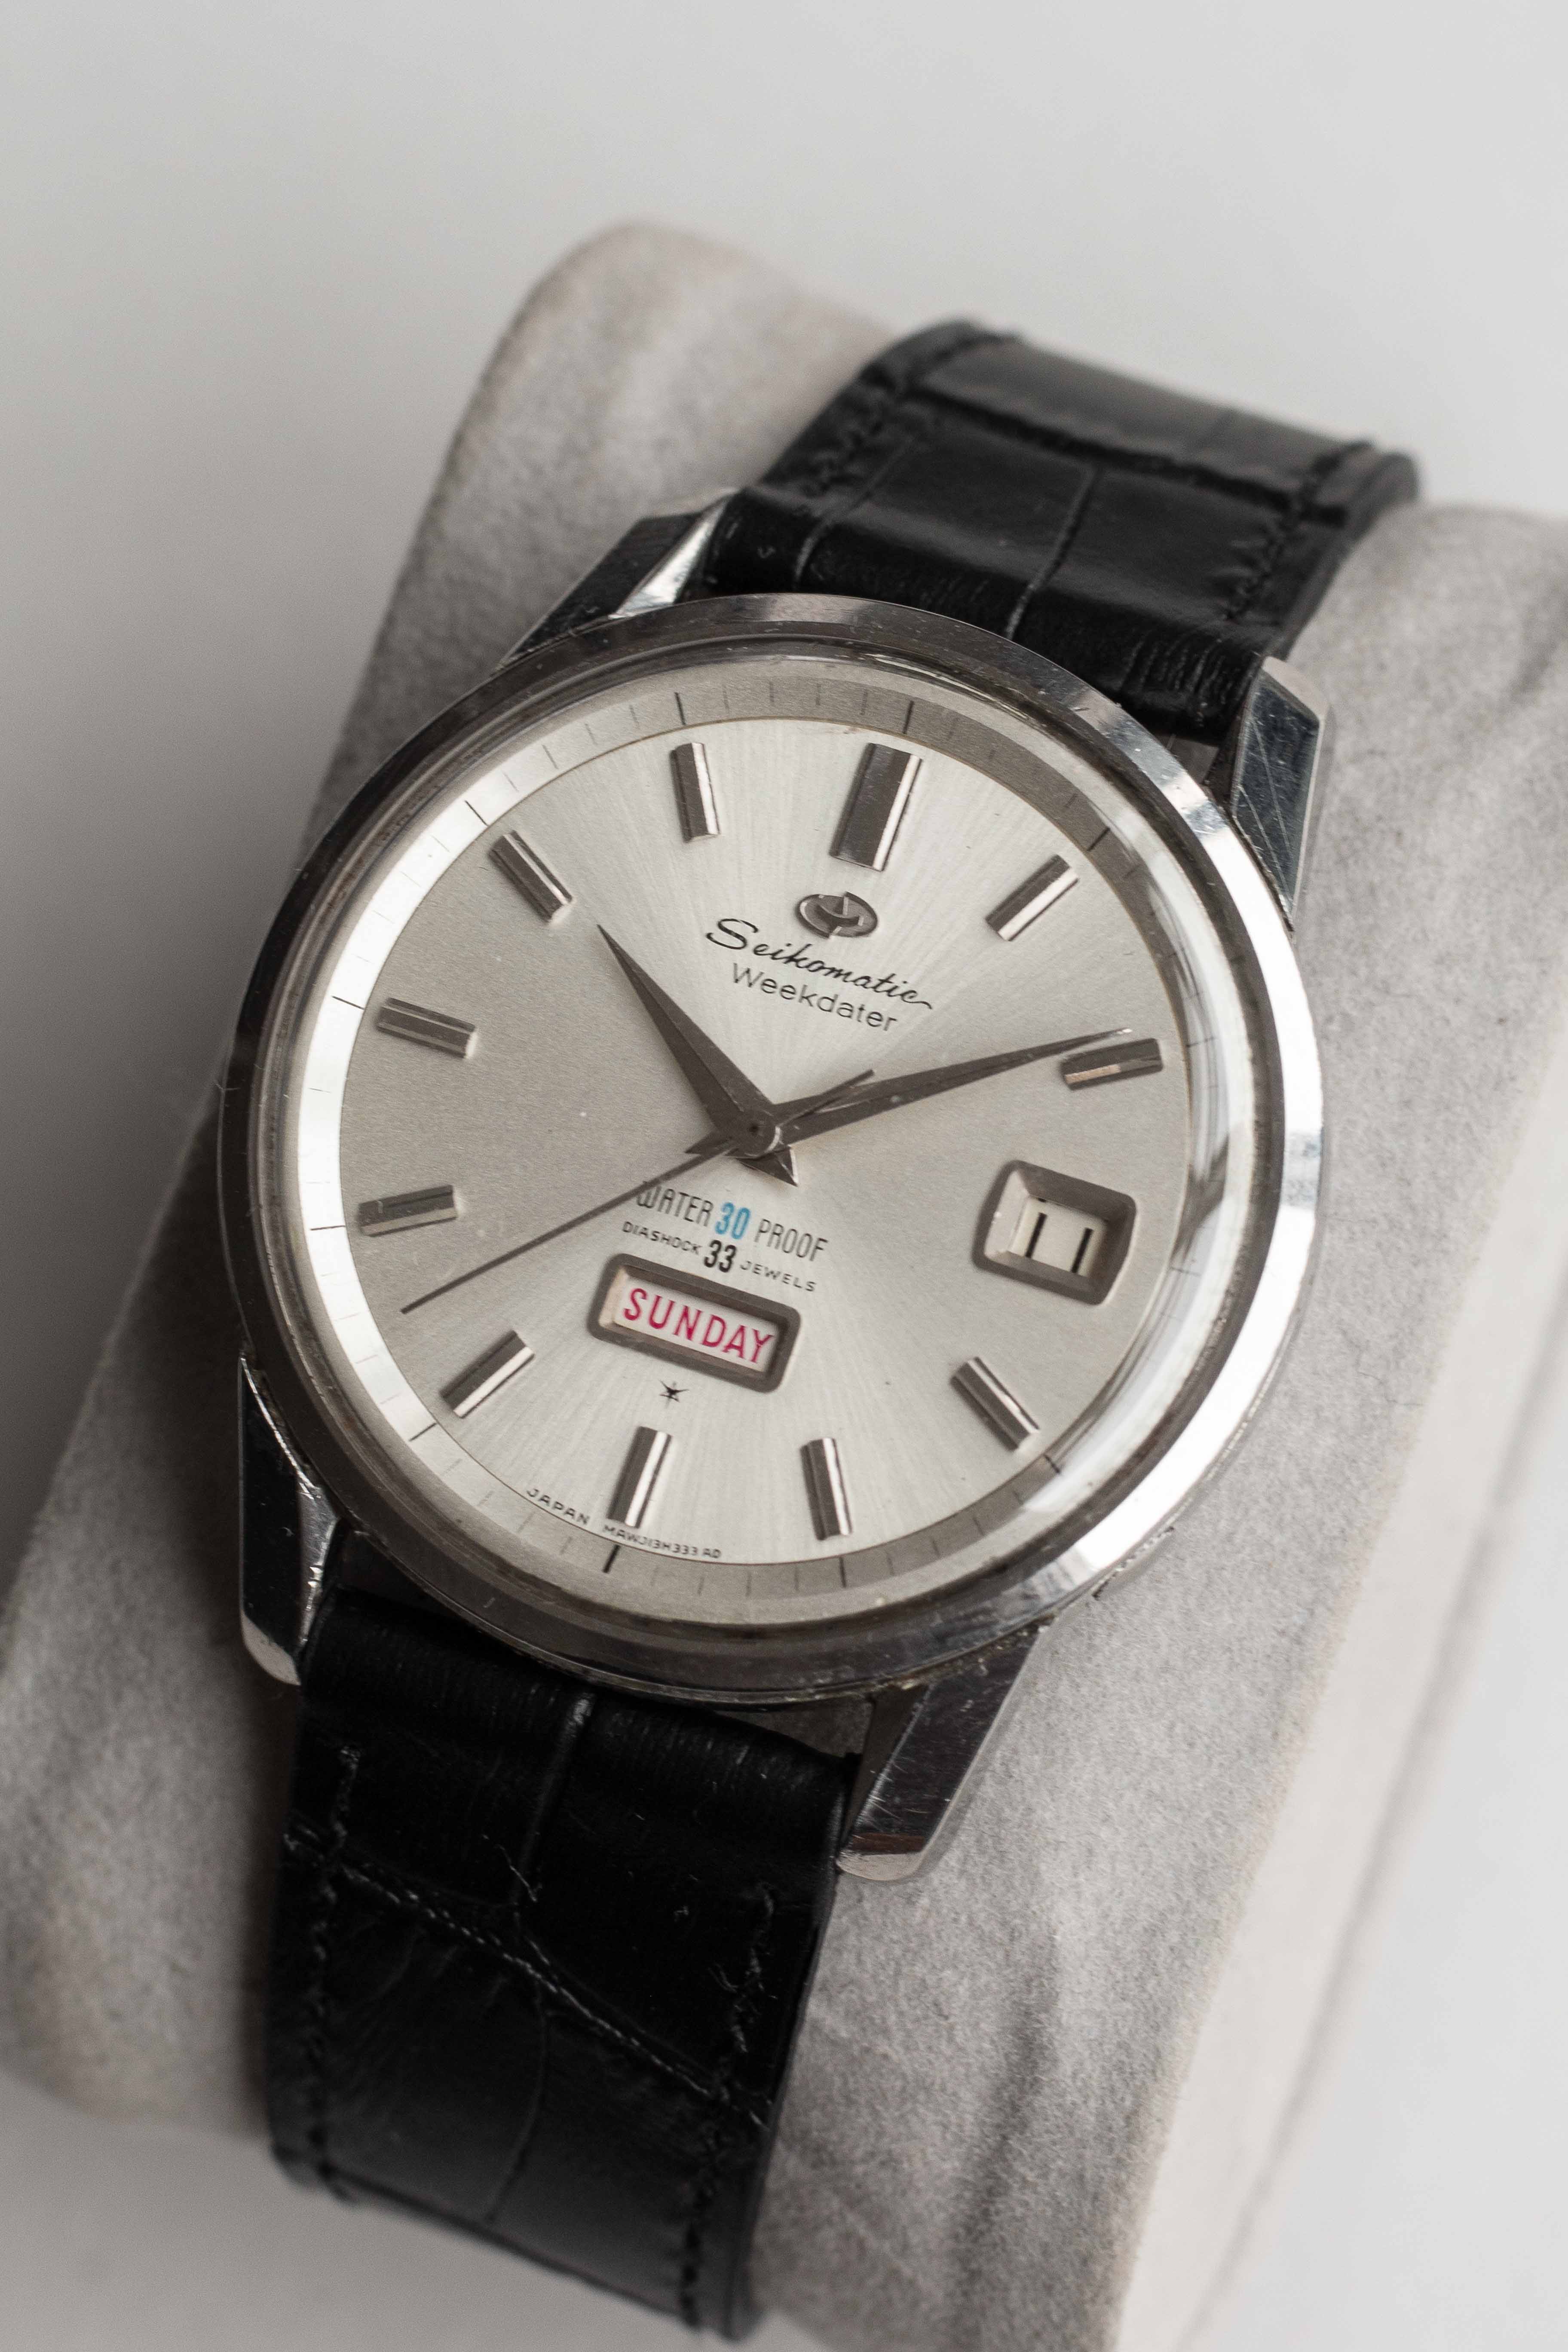 Seikomatic Weekdater Ref. J13080 1960's | Vintage & Pre-Owned 